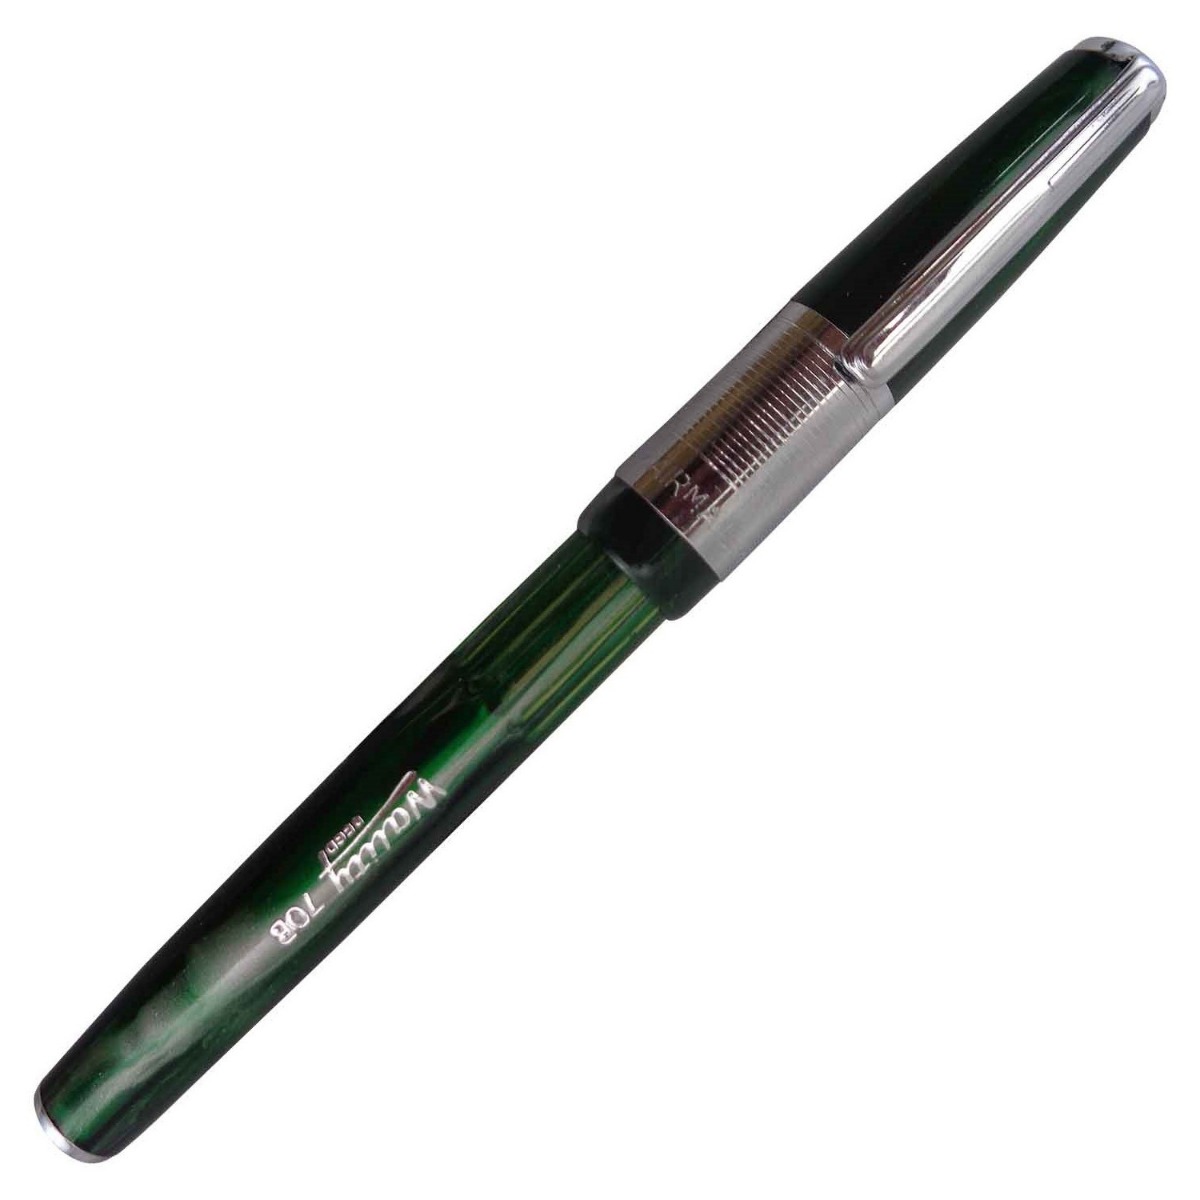 Airmail - Wality 70B Model:16024 Green  Color Marble Finish Design Body With Silver Clip Cap Type Fine Tip Fountain Pen